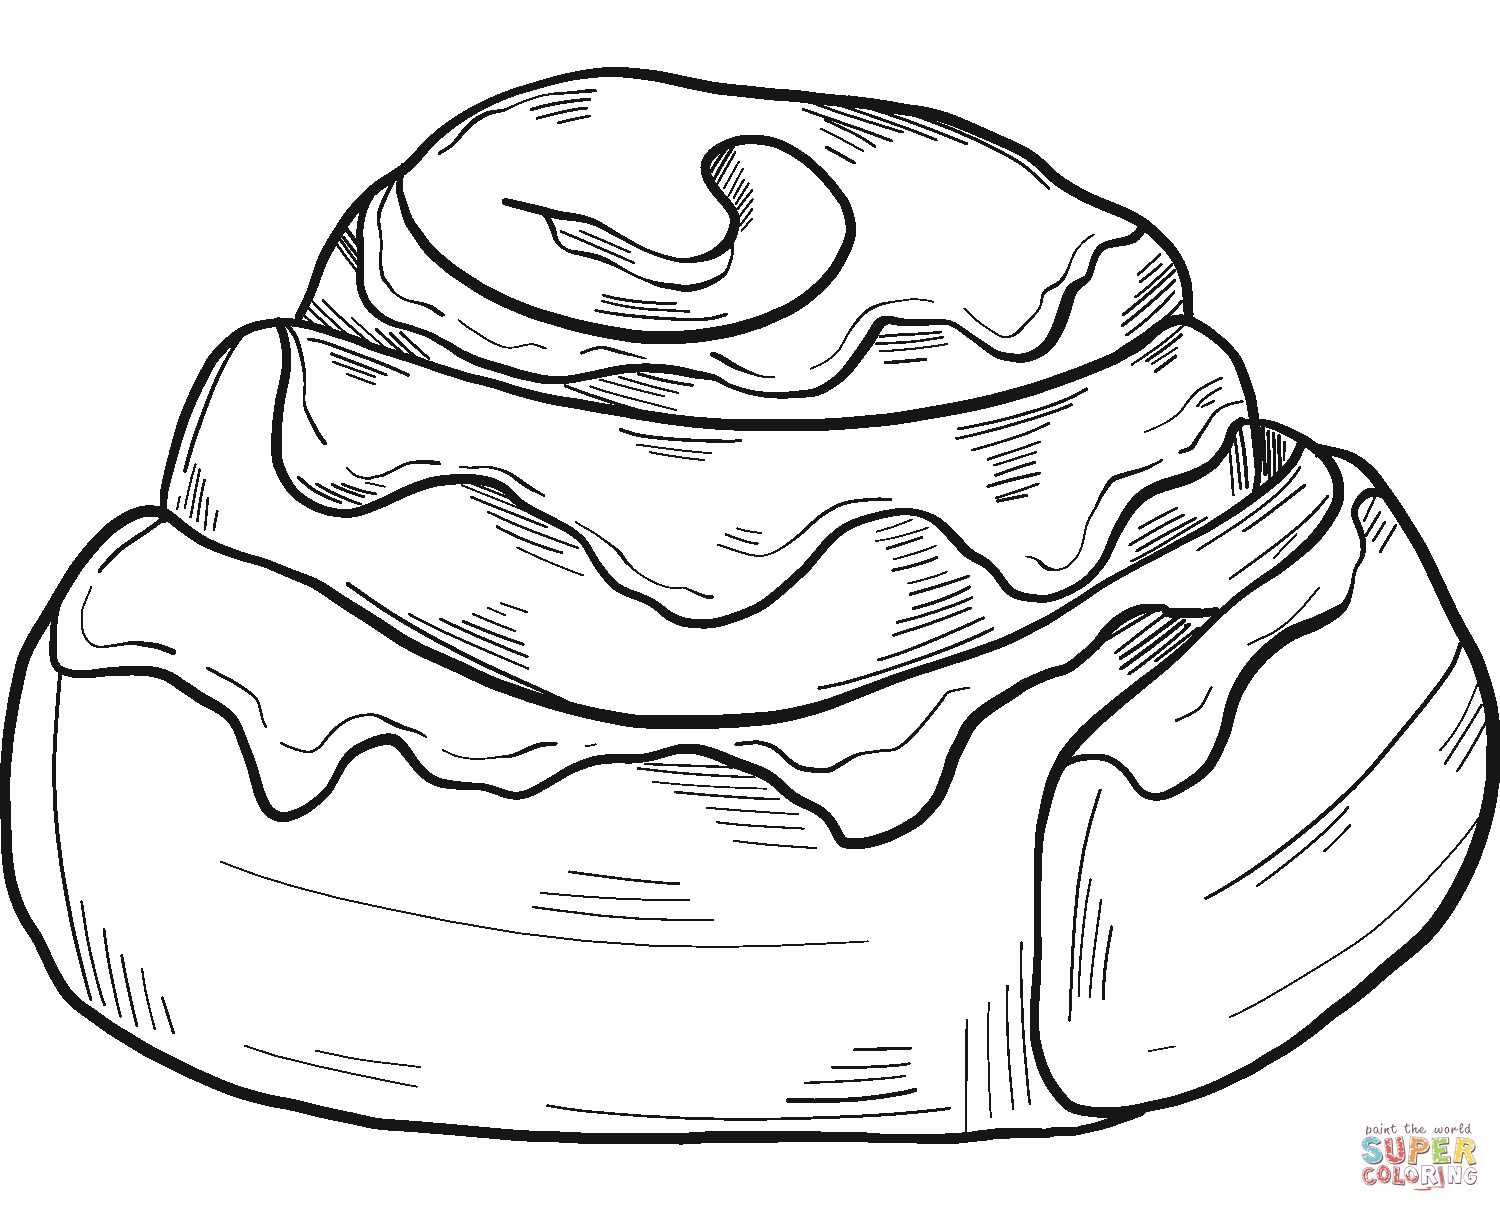 cinnamon-roll-coloring-page-free-printable-coloring-page-coloring-home